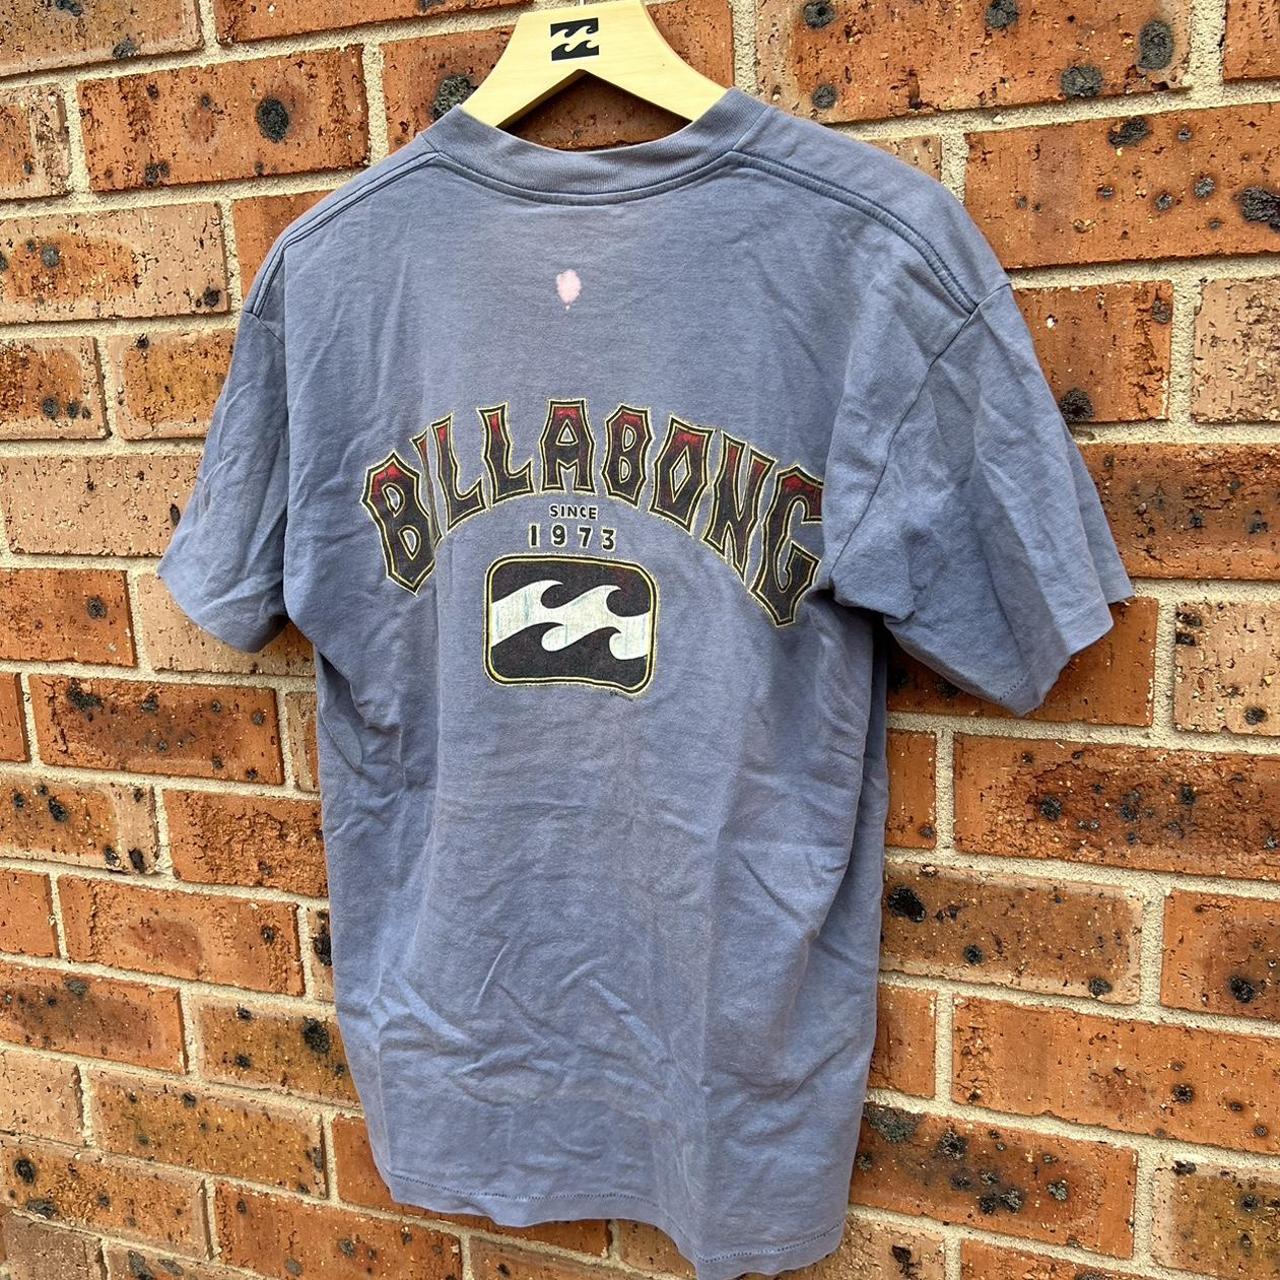 Billabong vintage tee Shipping $10 Size M Made in... Depop